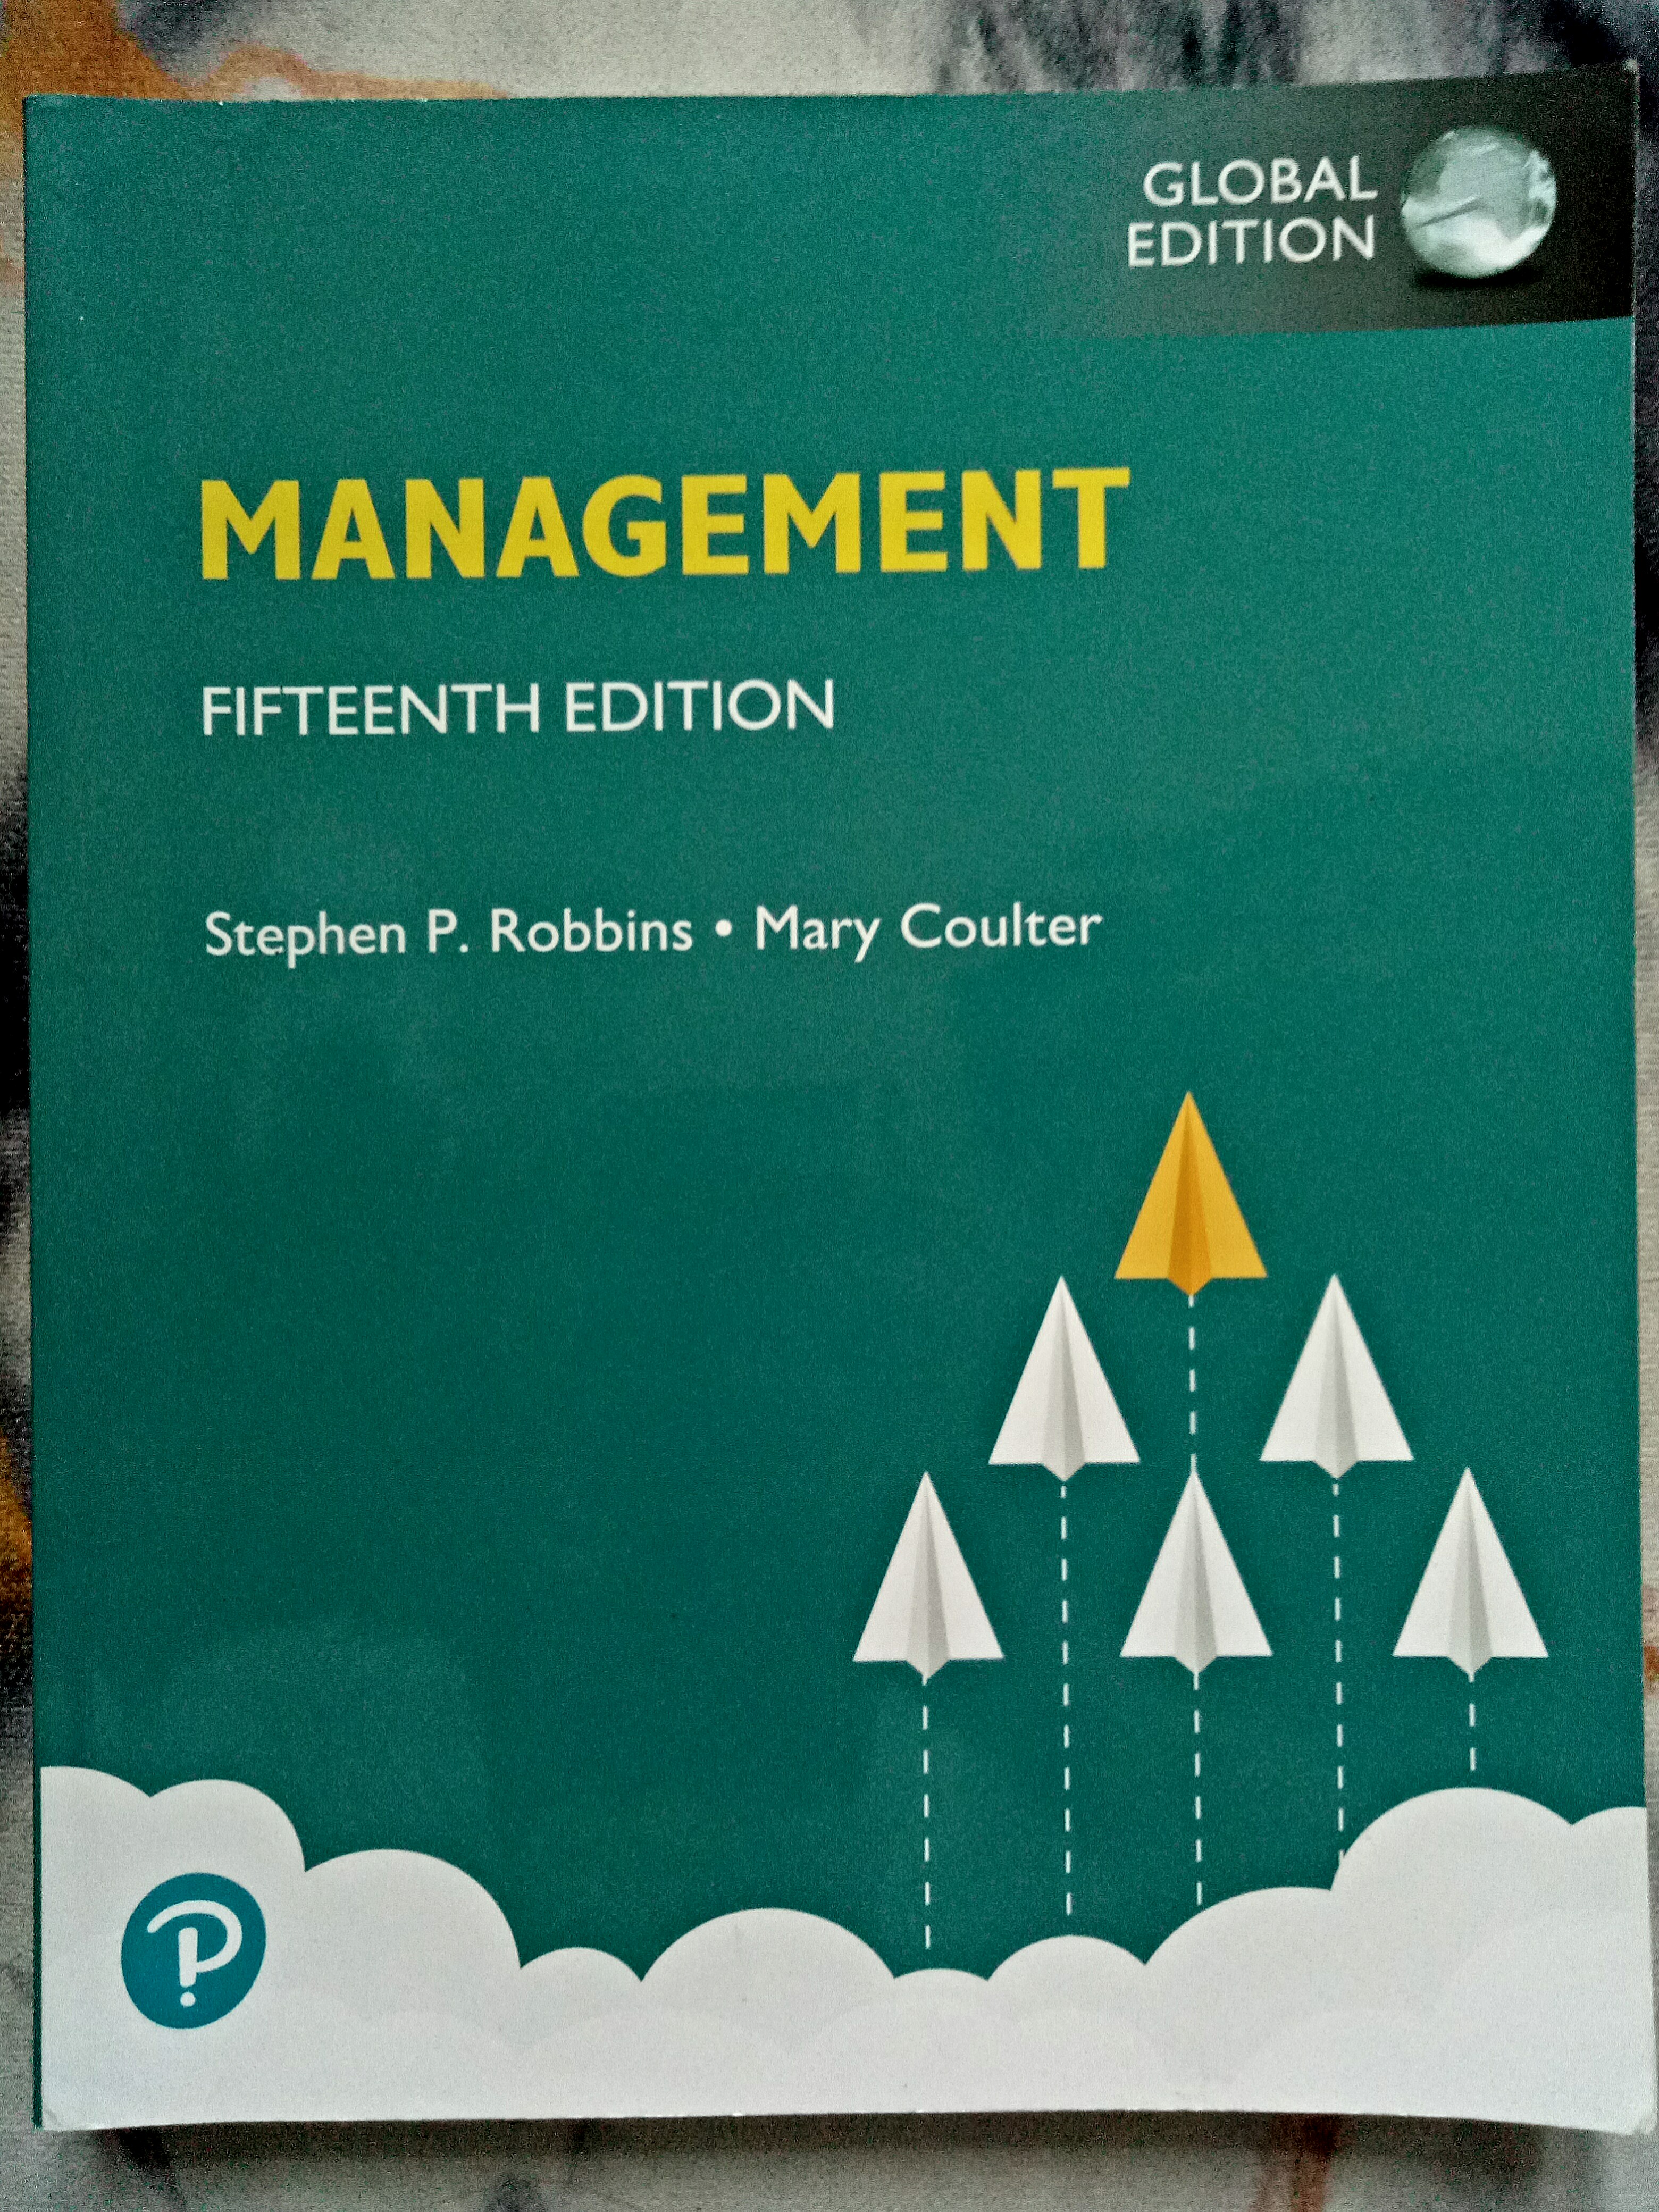 MANAGEMENT, 15TH EDITION(GLOBAL EDITION)